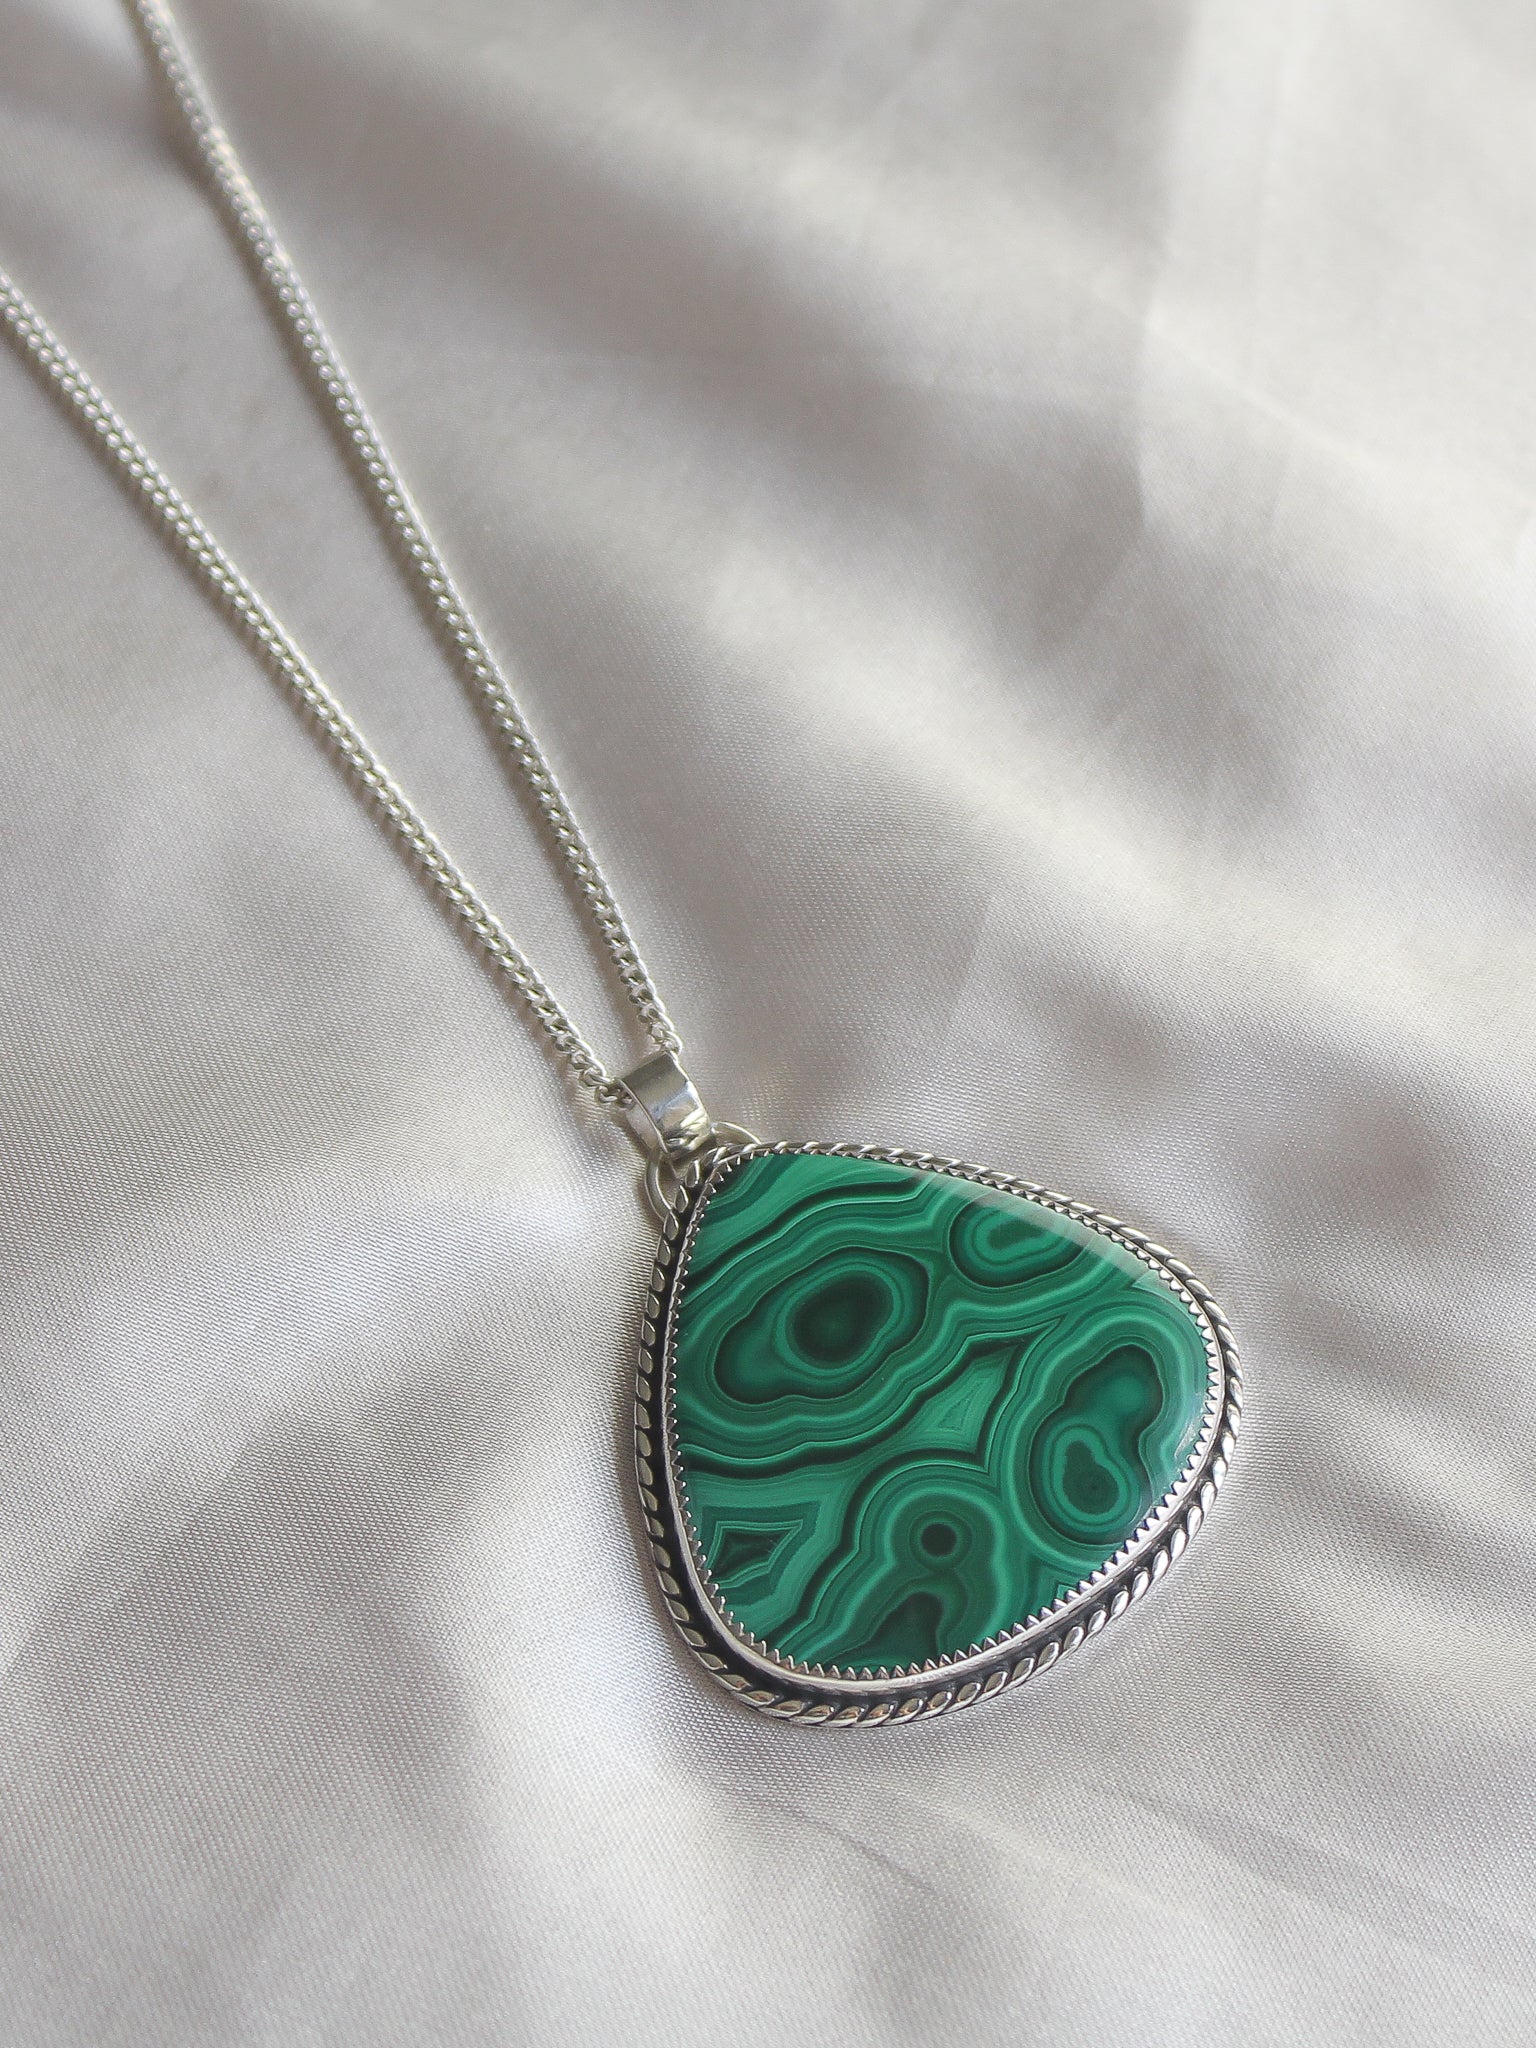 Handmade 925 sterling silver pendant with malachite stone lily and William jewelry 